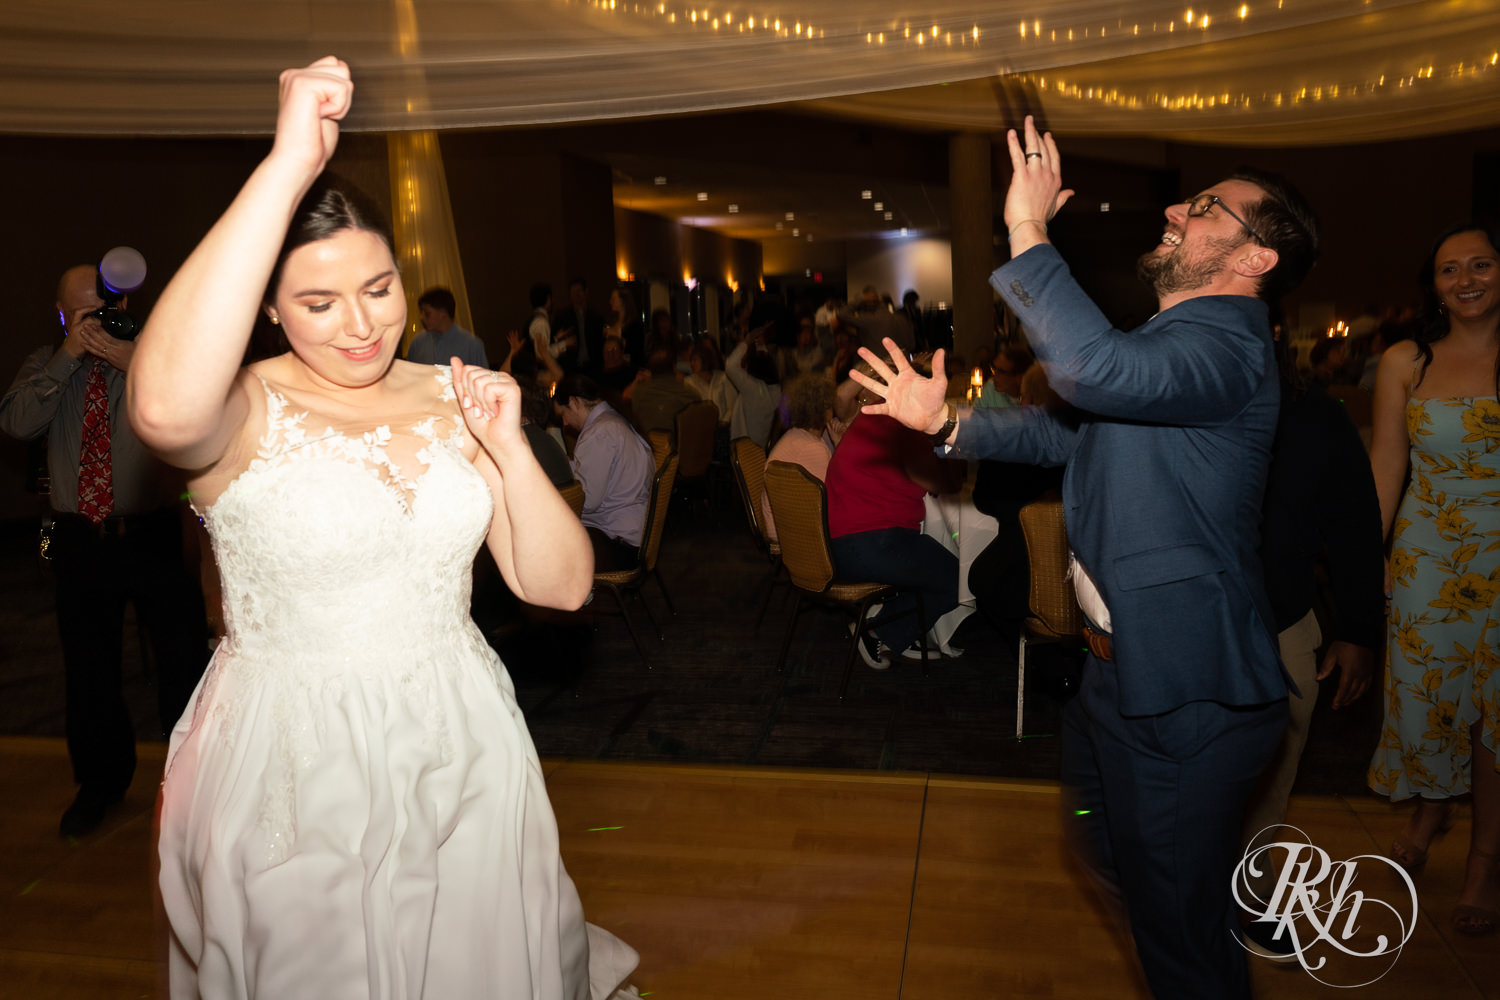 Bride and groom dance with guests at wedding reception at Doubletree Hilton Saint Paul in Saint Paul, Minnesota.